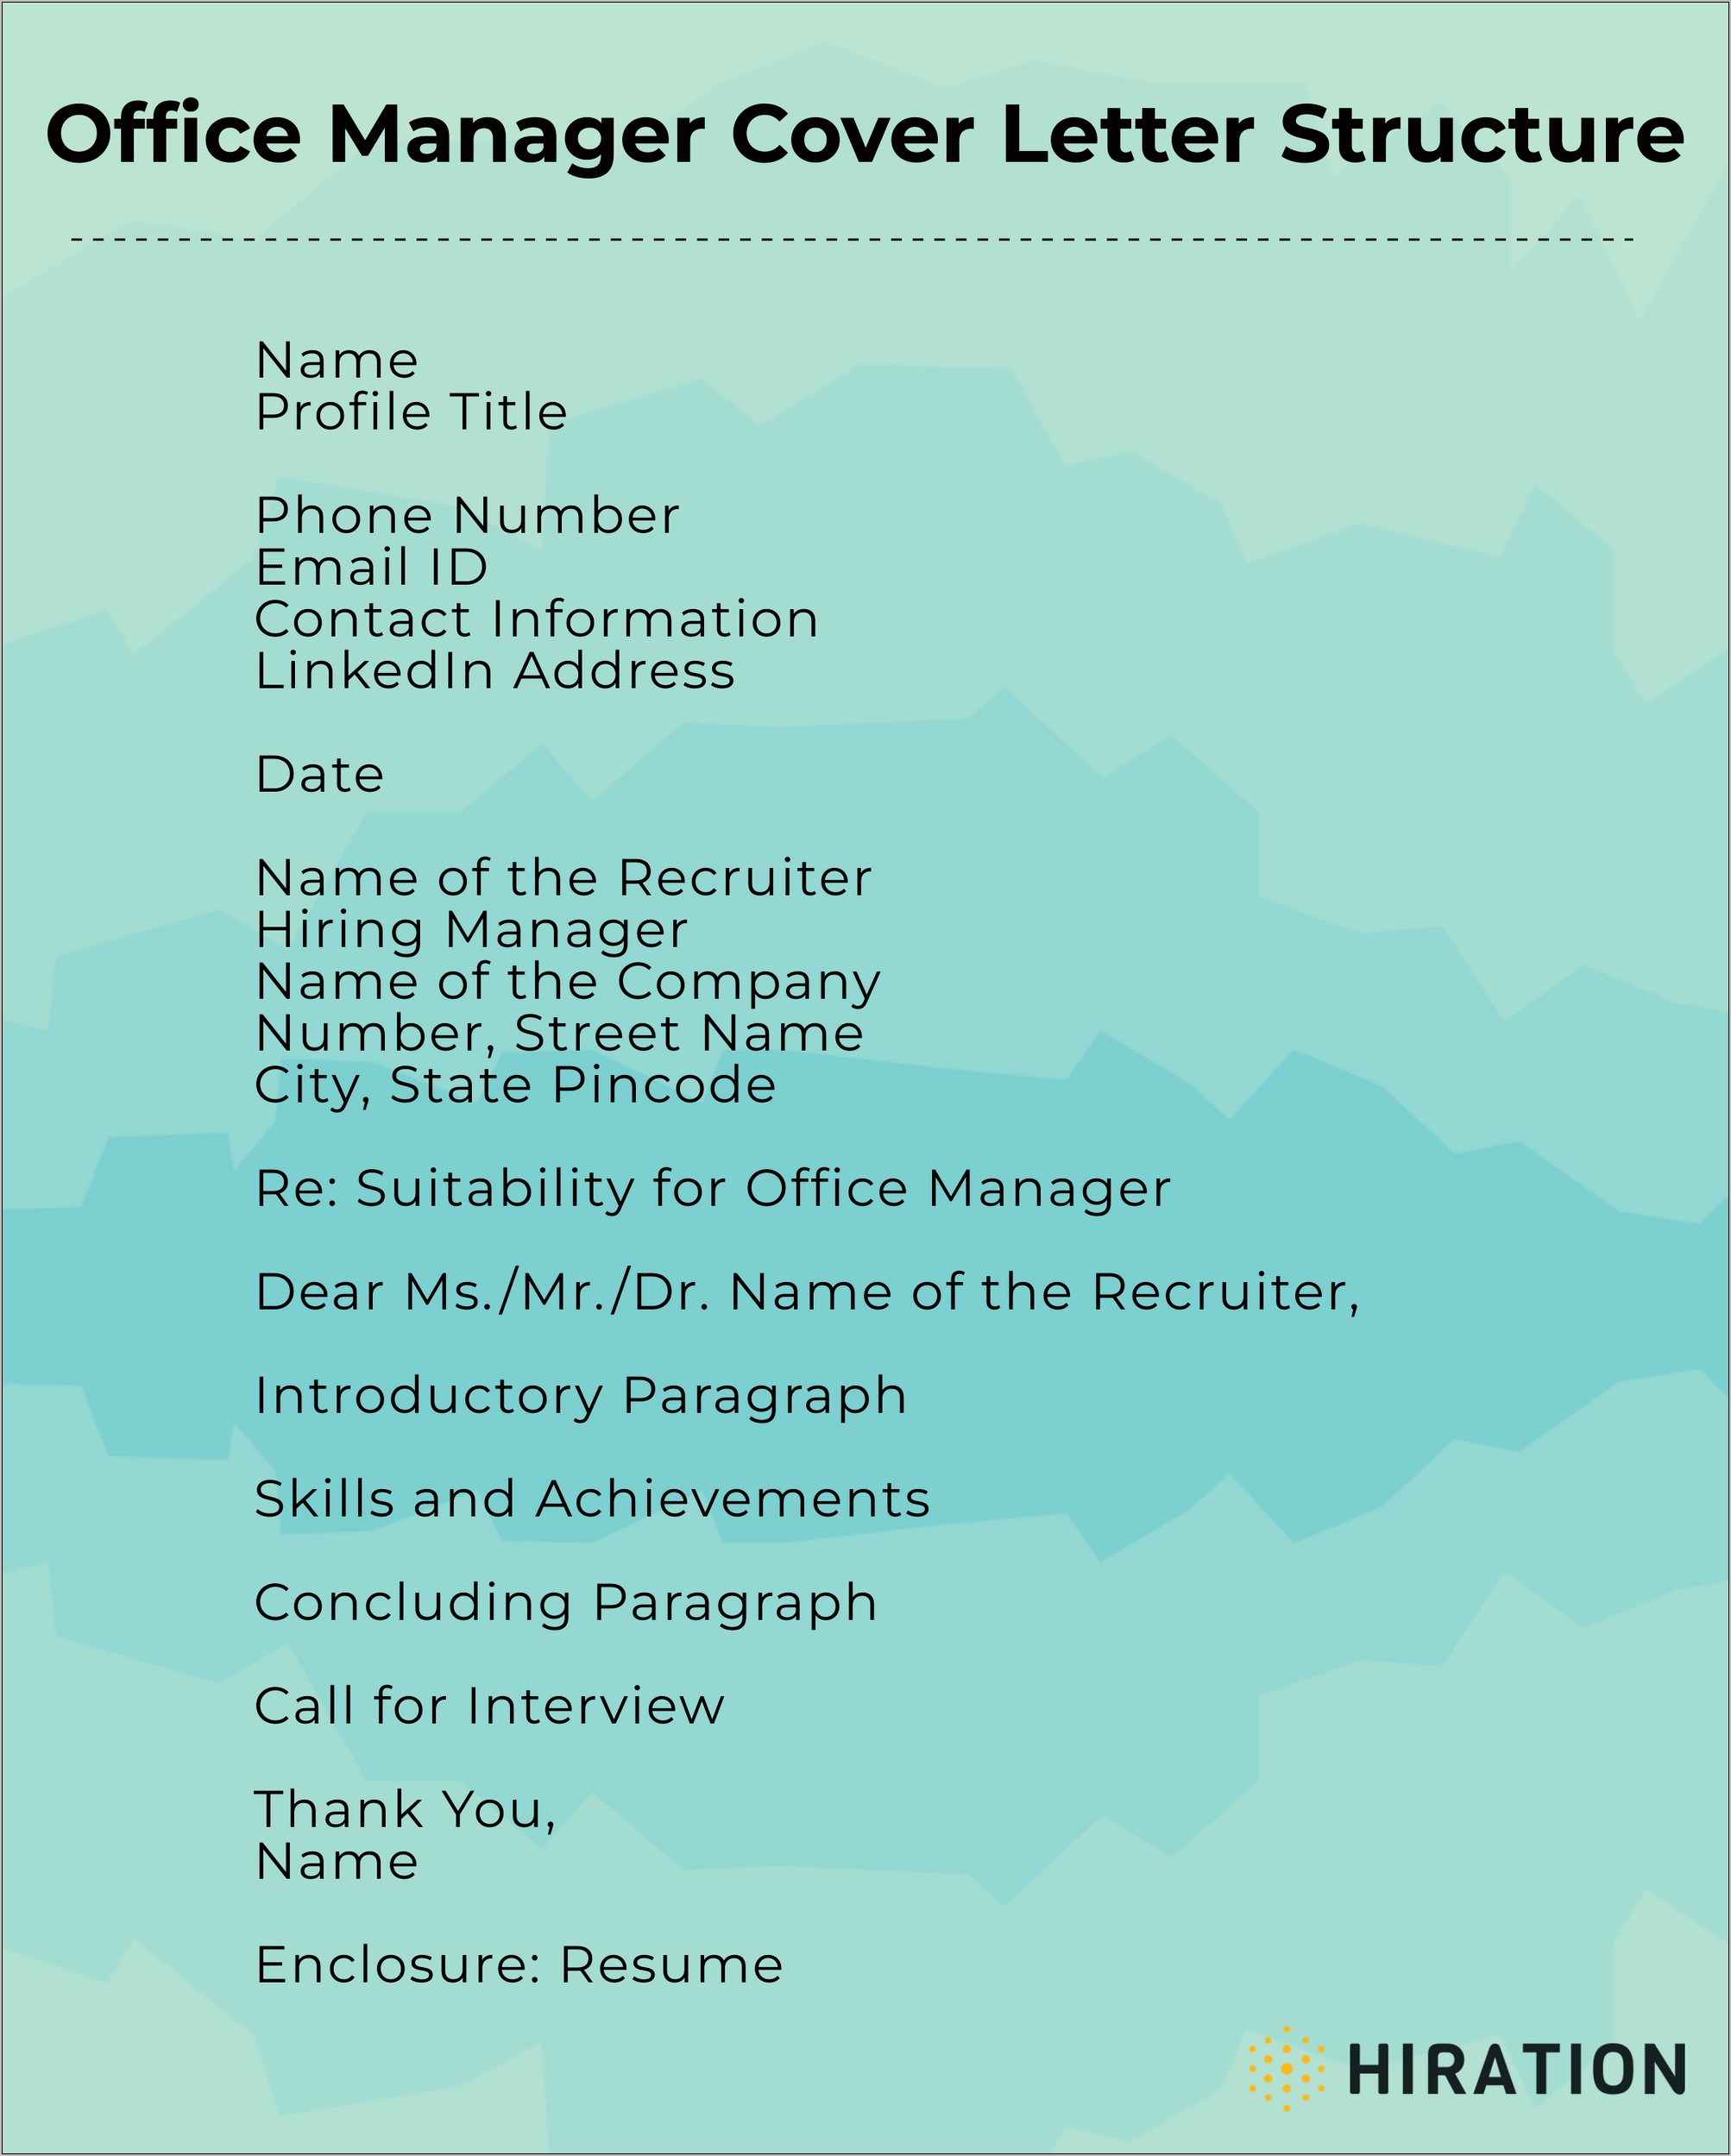 Resume Title For Office Manager